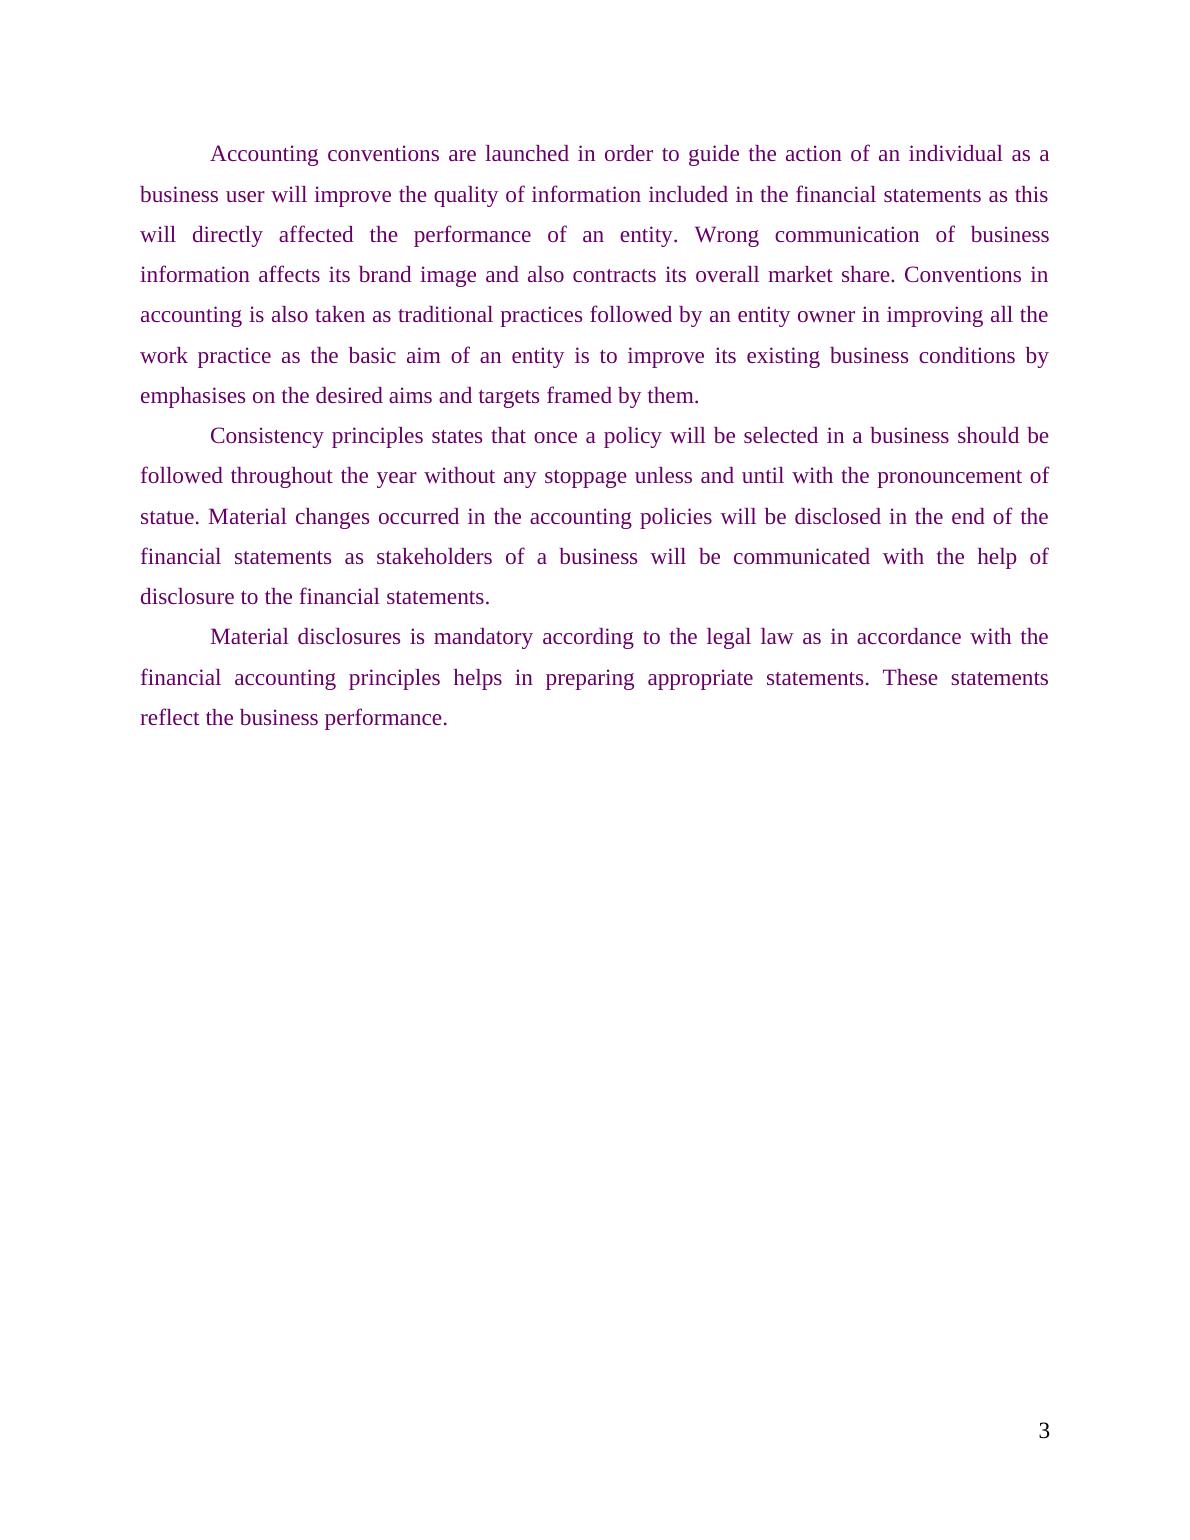 A Study on Financial Accounting Concepts in Business Organization_5